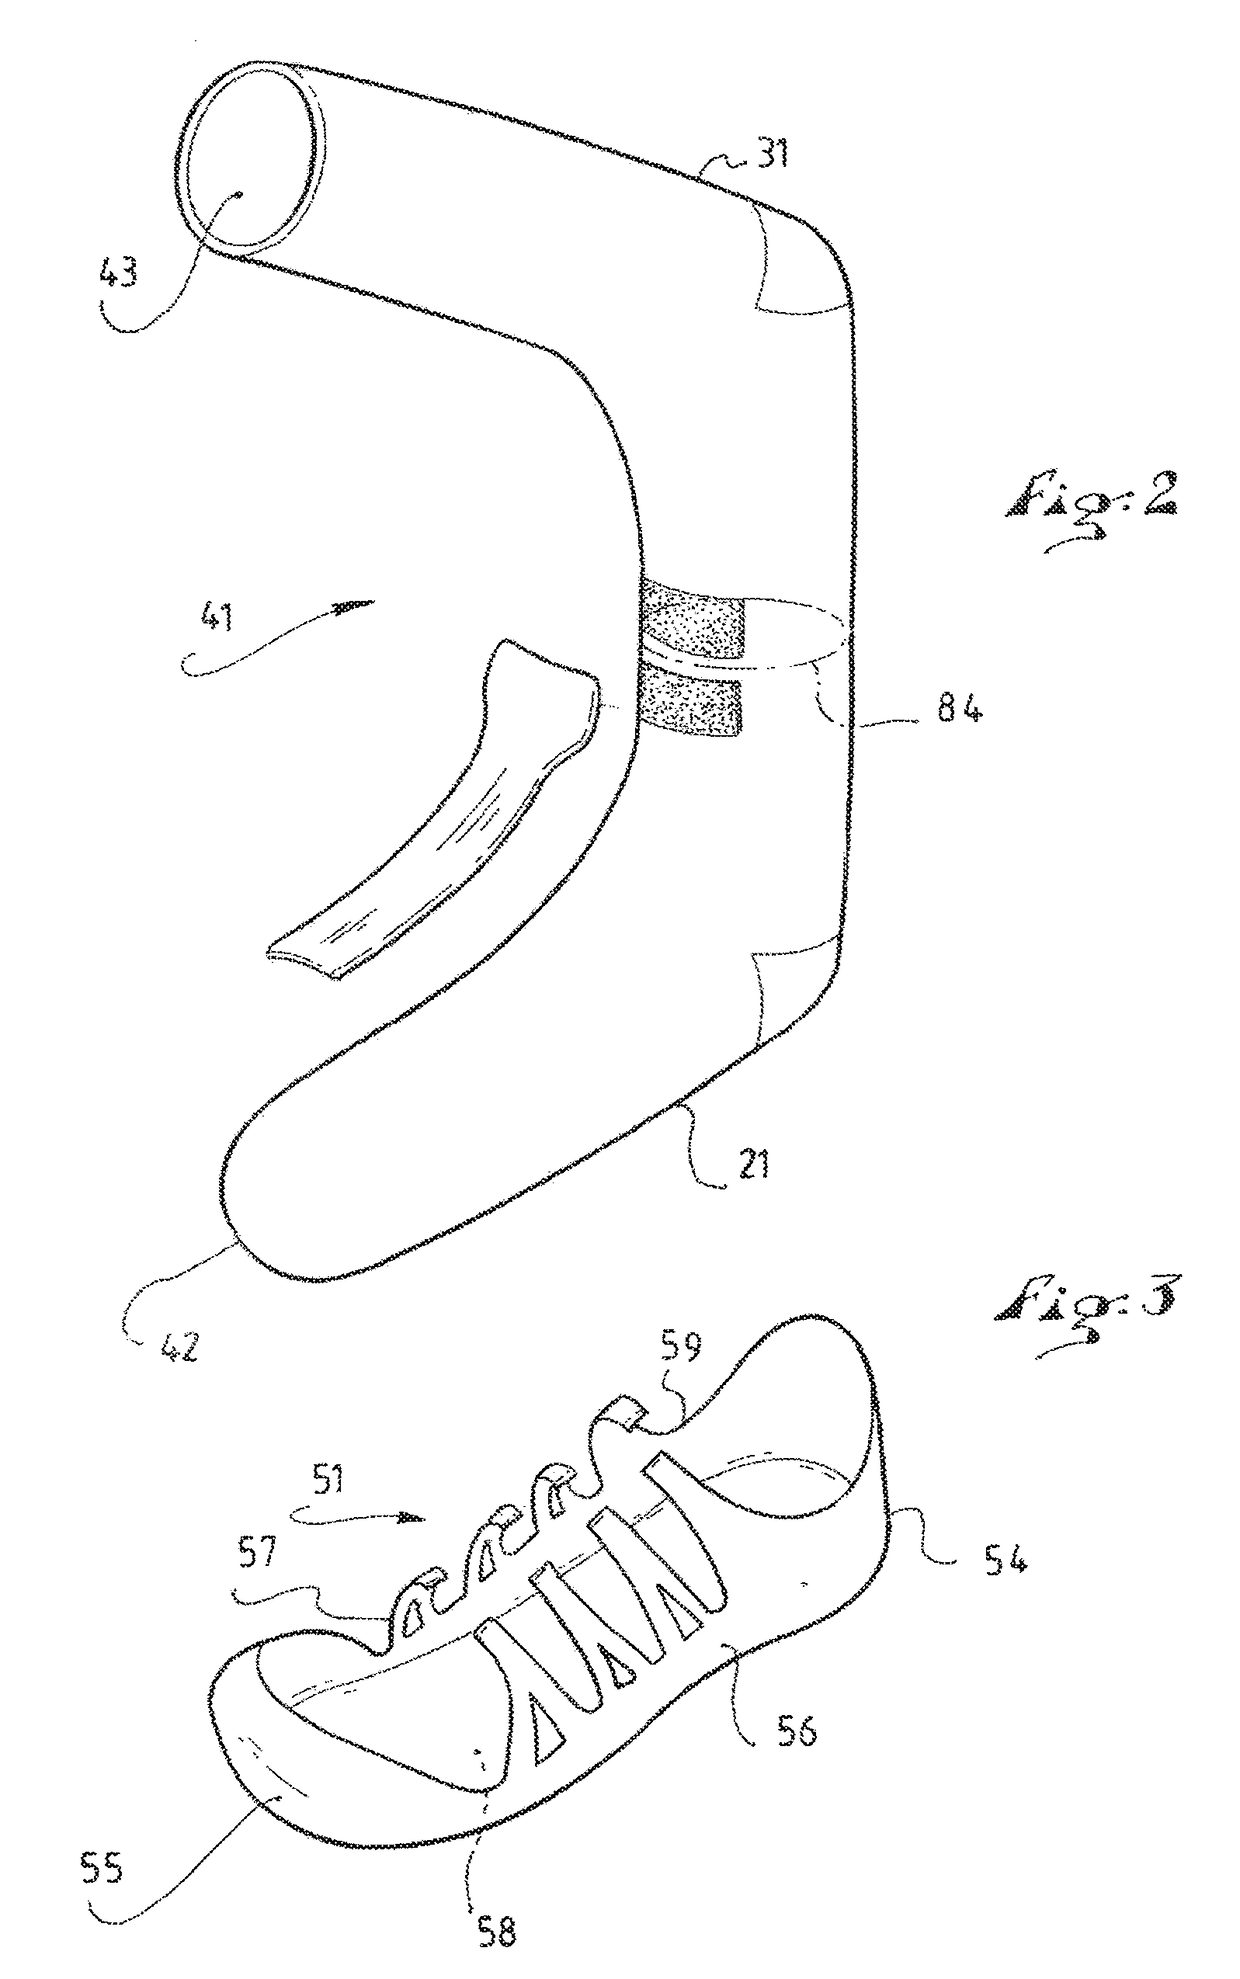 Method for manufacturing footwear, footwear produced using said method, and machine for manufacturing footwear